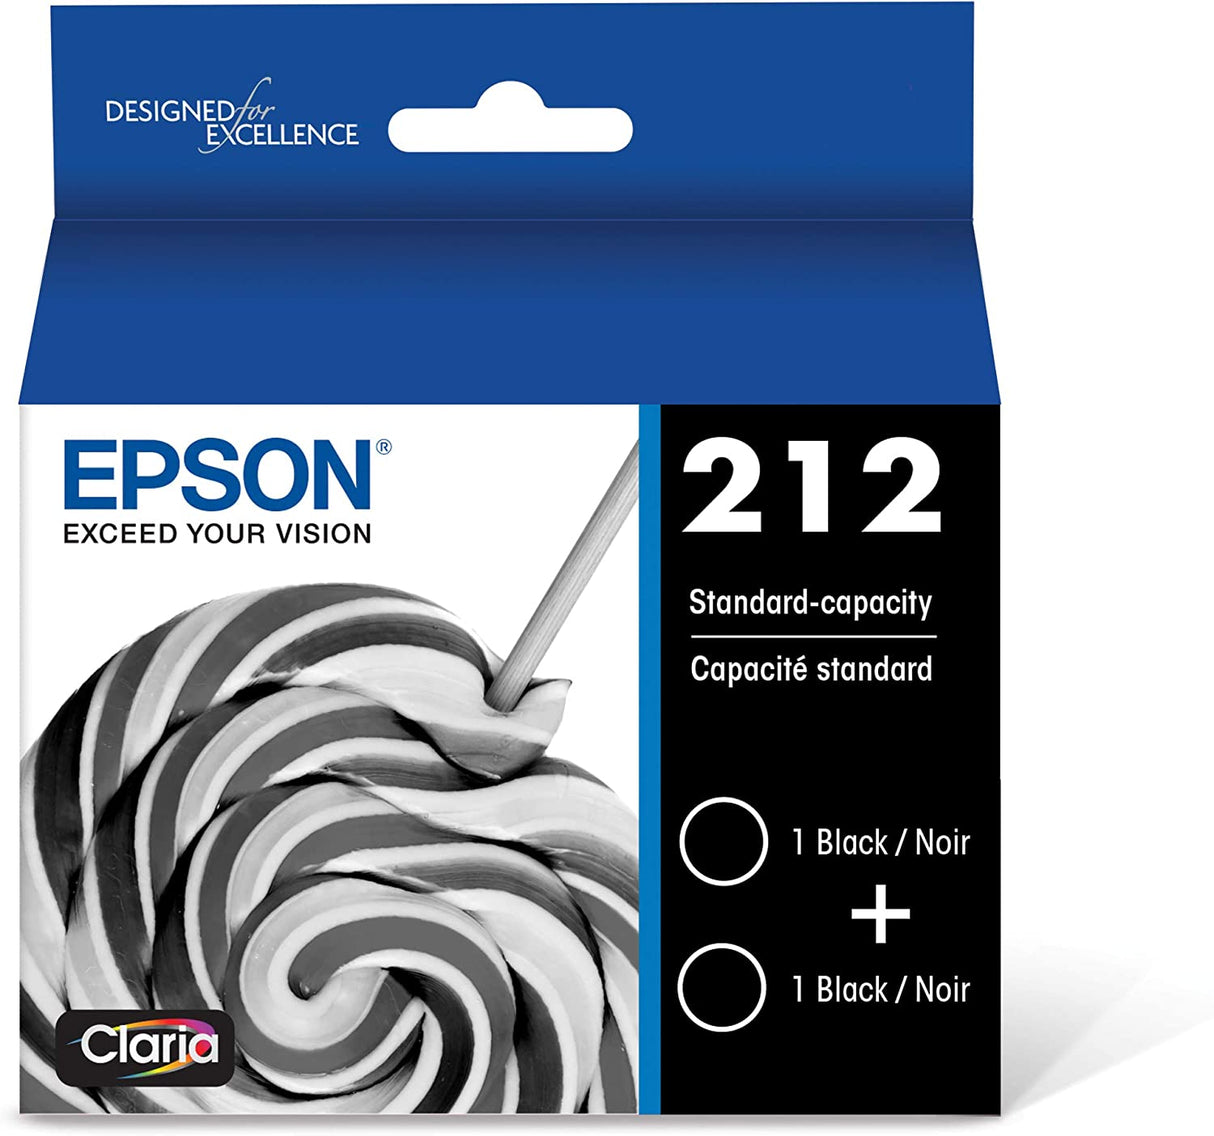 EPSON T212 Claria -Ink Standard Capacity Black Dual -Cartridge Pack (T212120-D2) for Select Epson Expression and Workforce Printers &amp; T212 Claria -Ink Standard Capacity Magenta -Cartridge (T212320-S) Claria-Ink Black Dual + Claria-Ink Magenta